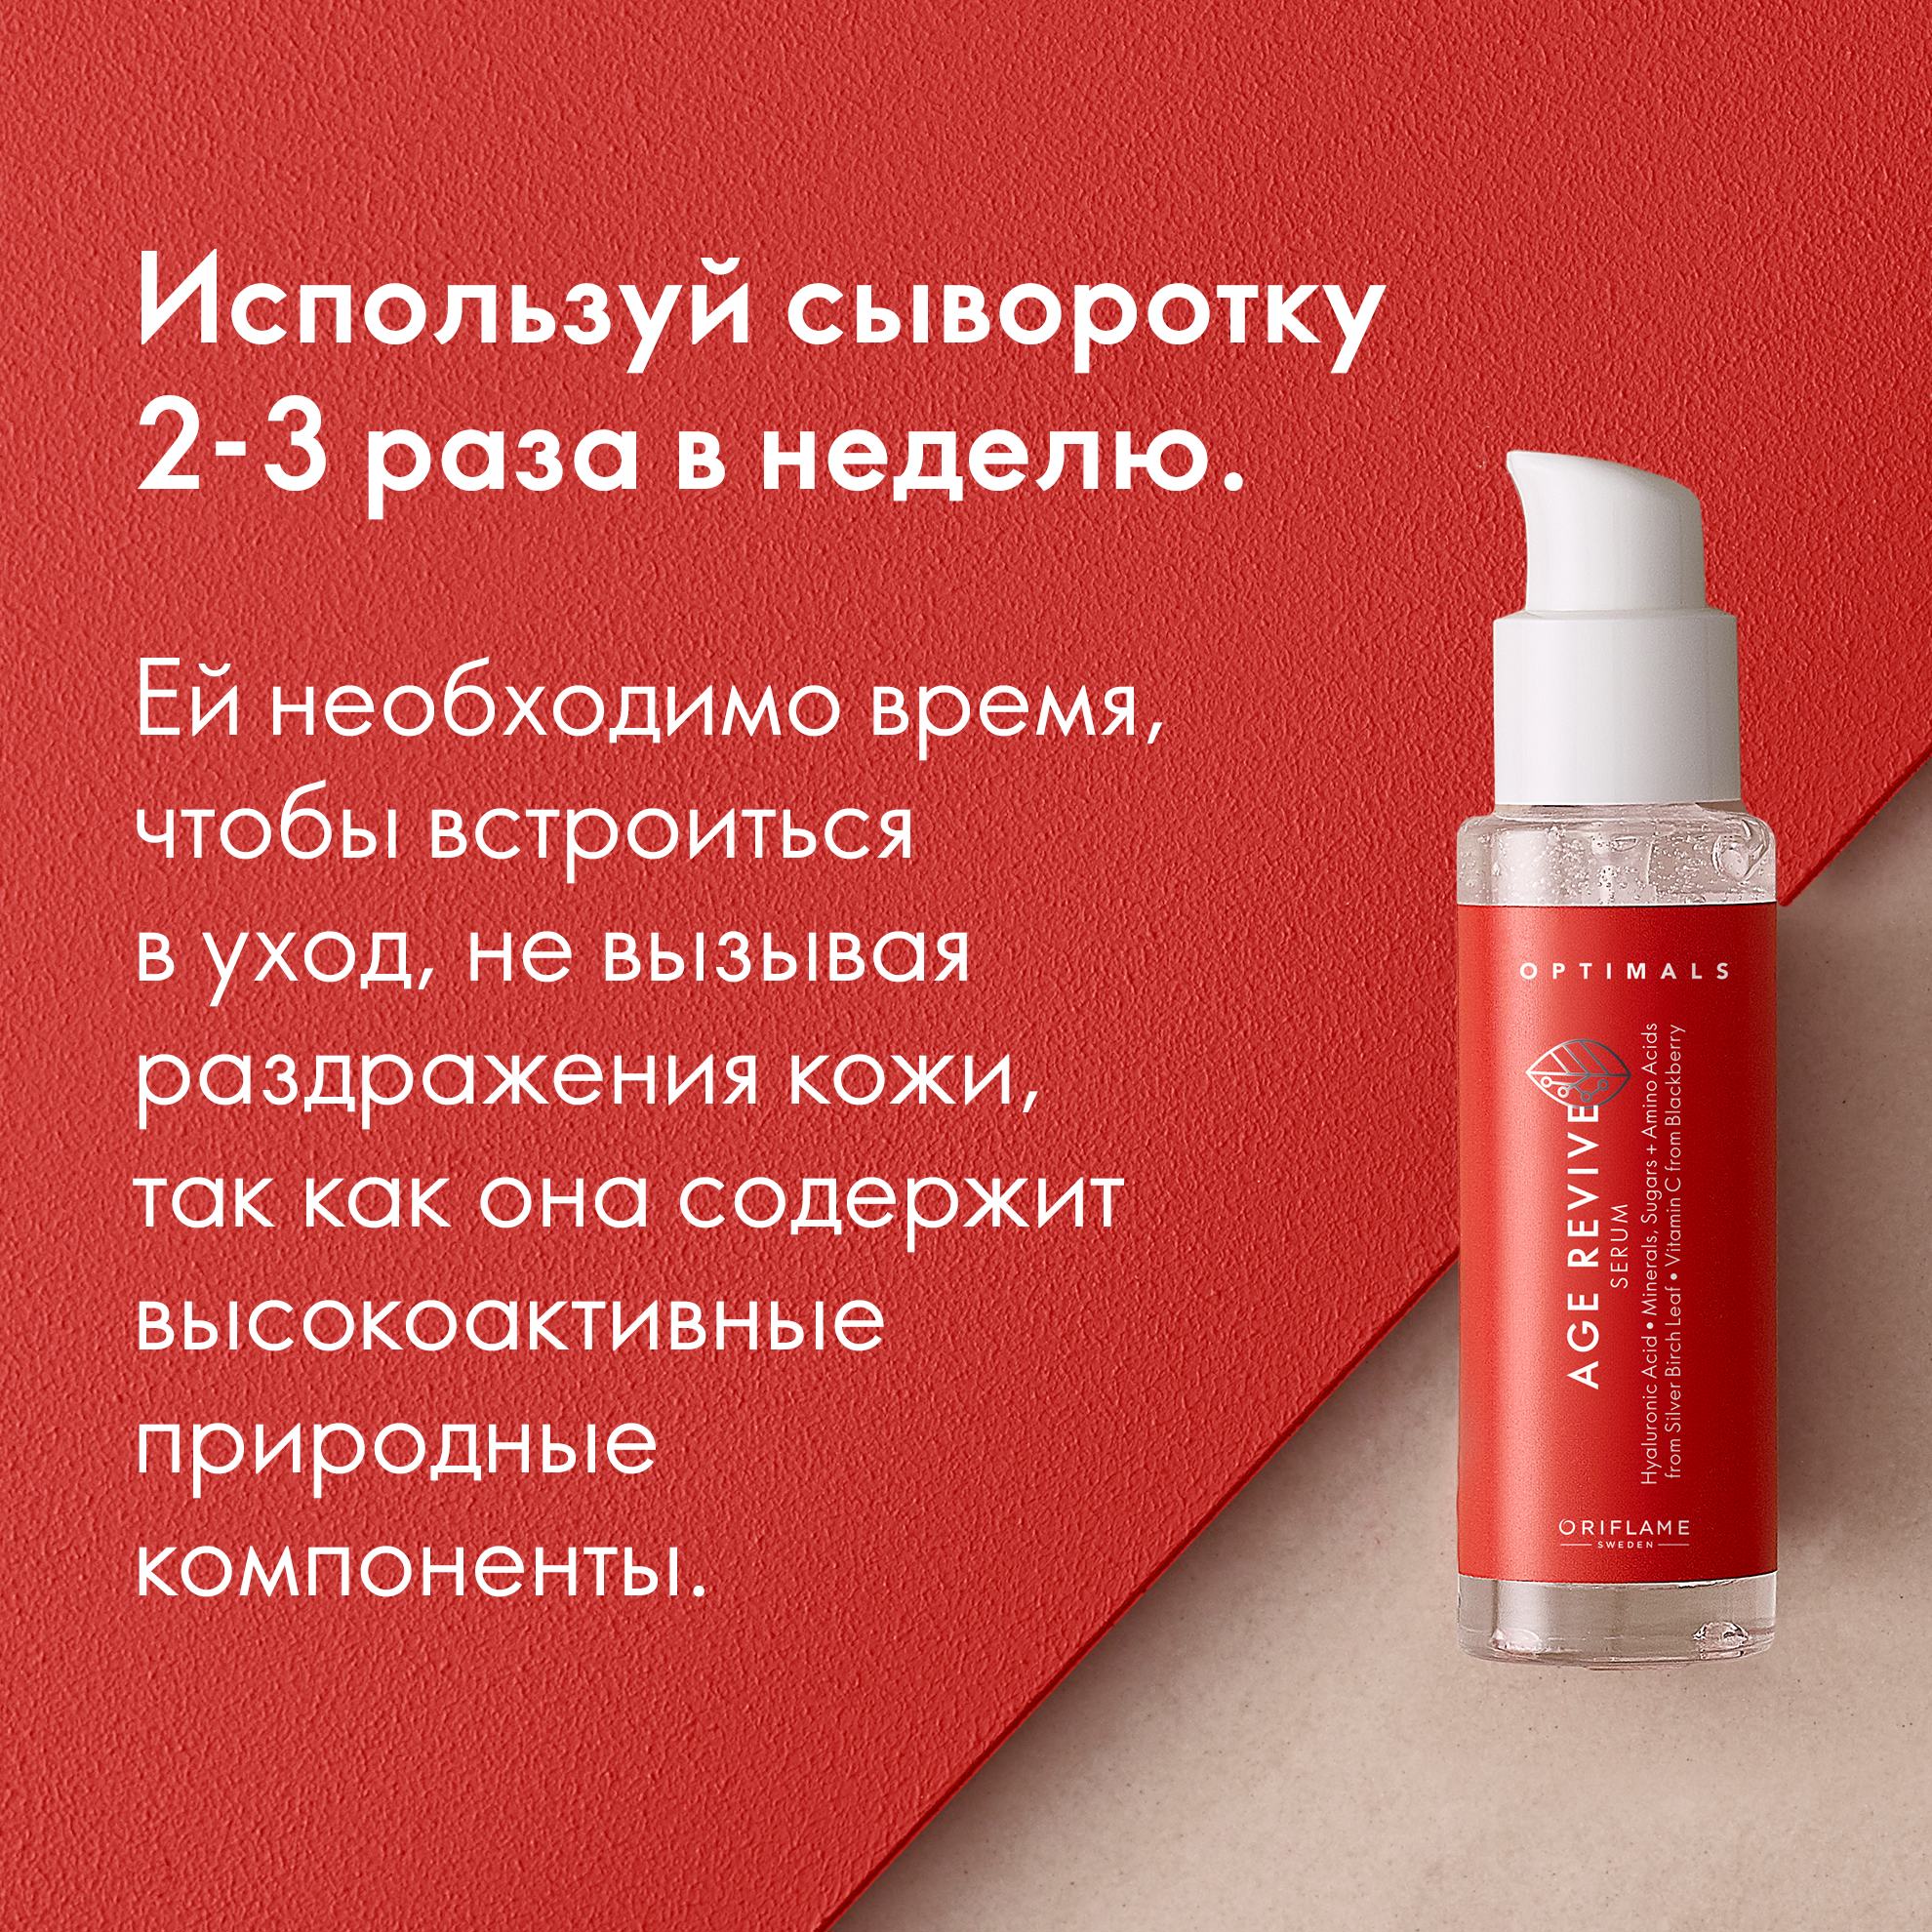 https://media-cdn.oriflame.com/productImage?externalMediaId=product-management-media%2fProducts%2f42551%2fRU%2f42551_5.png&id=15087739&version=1